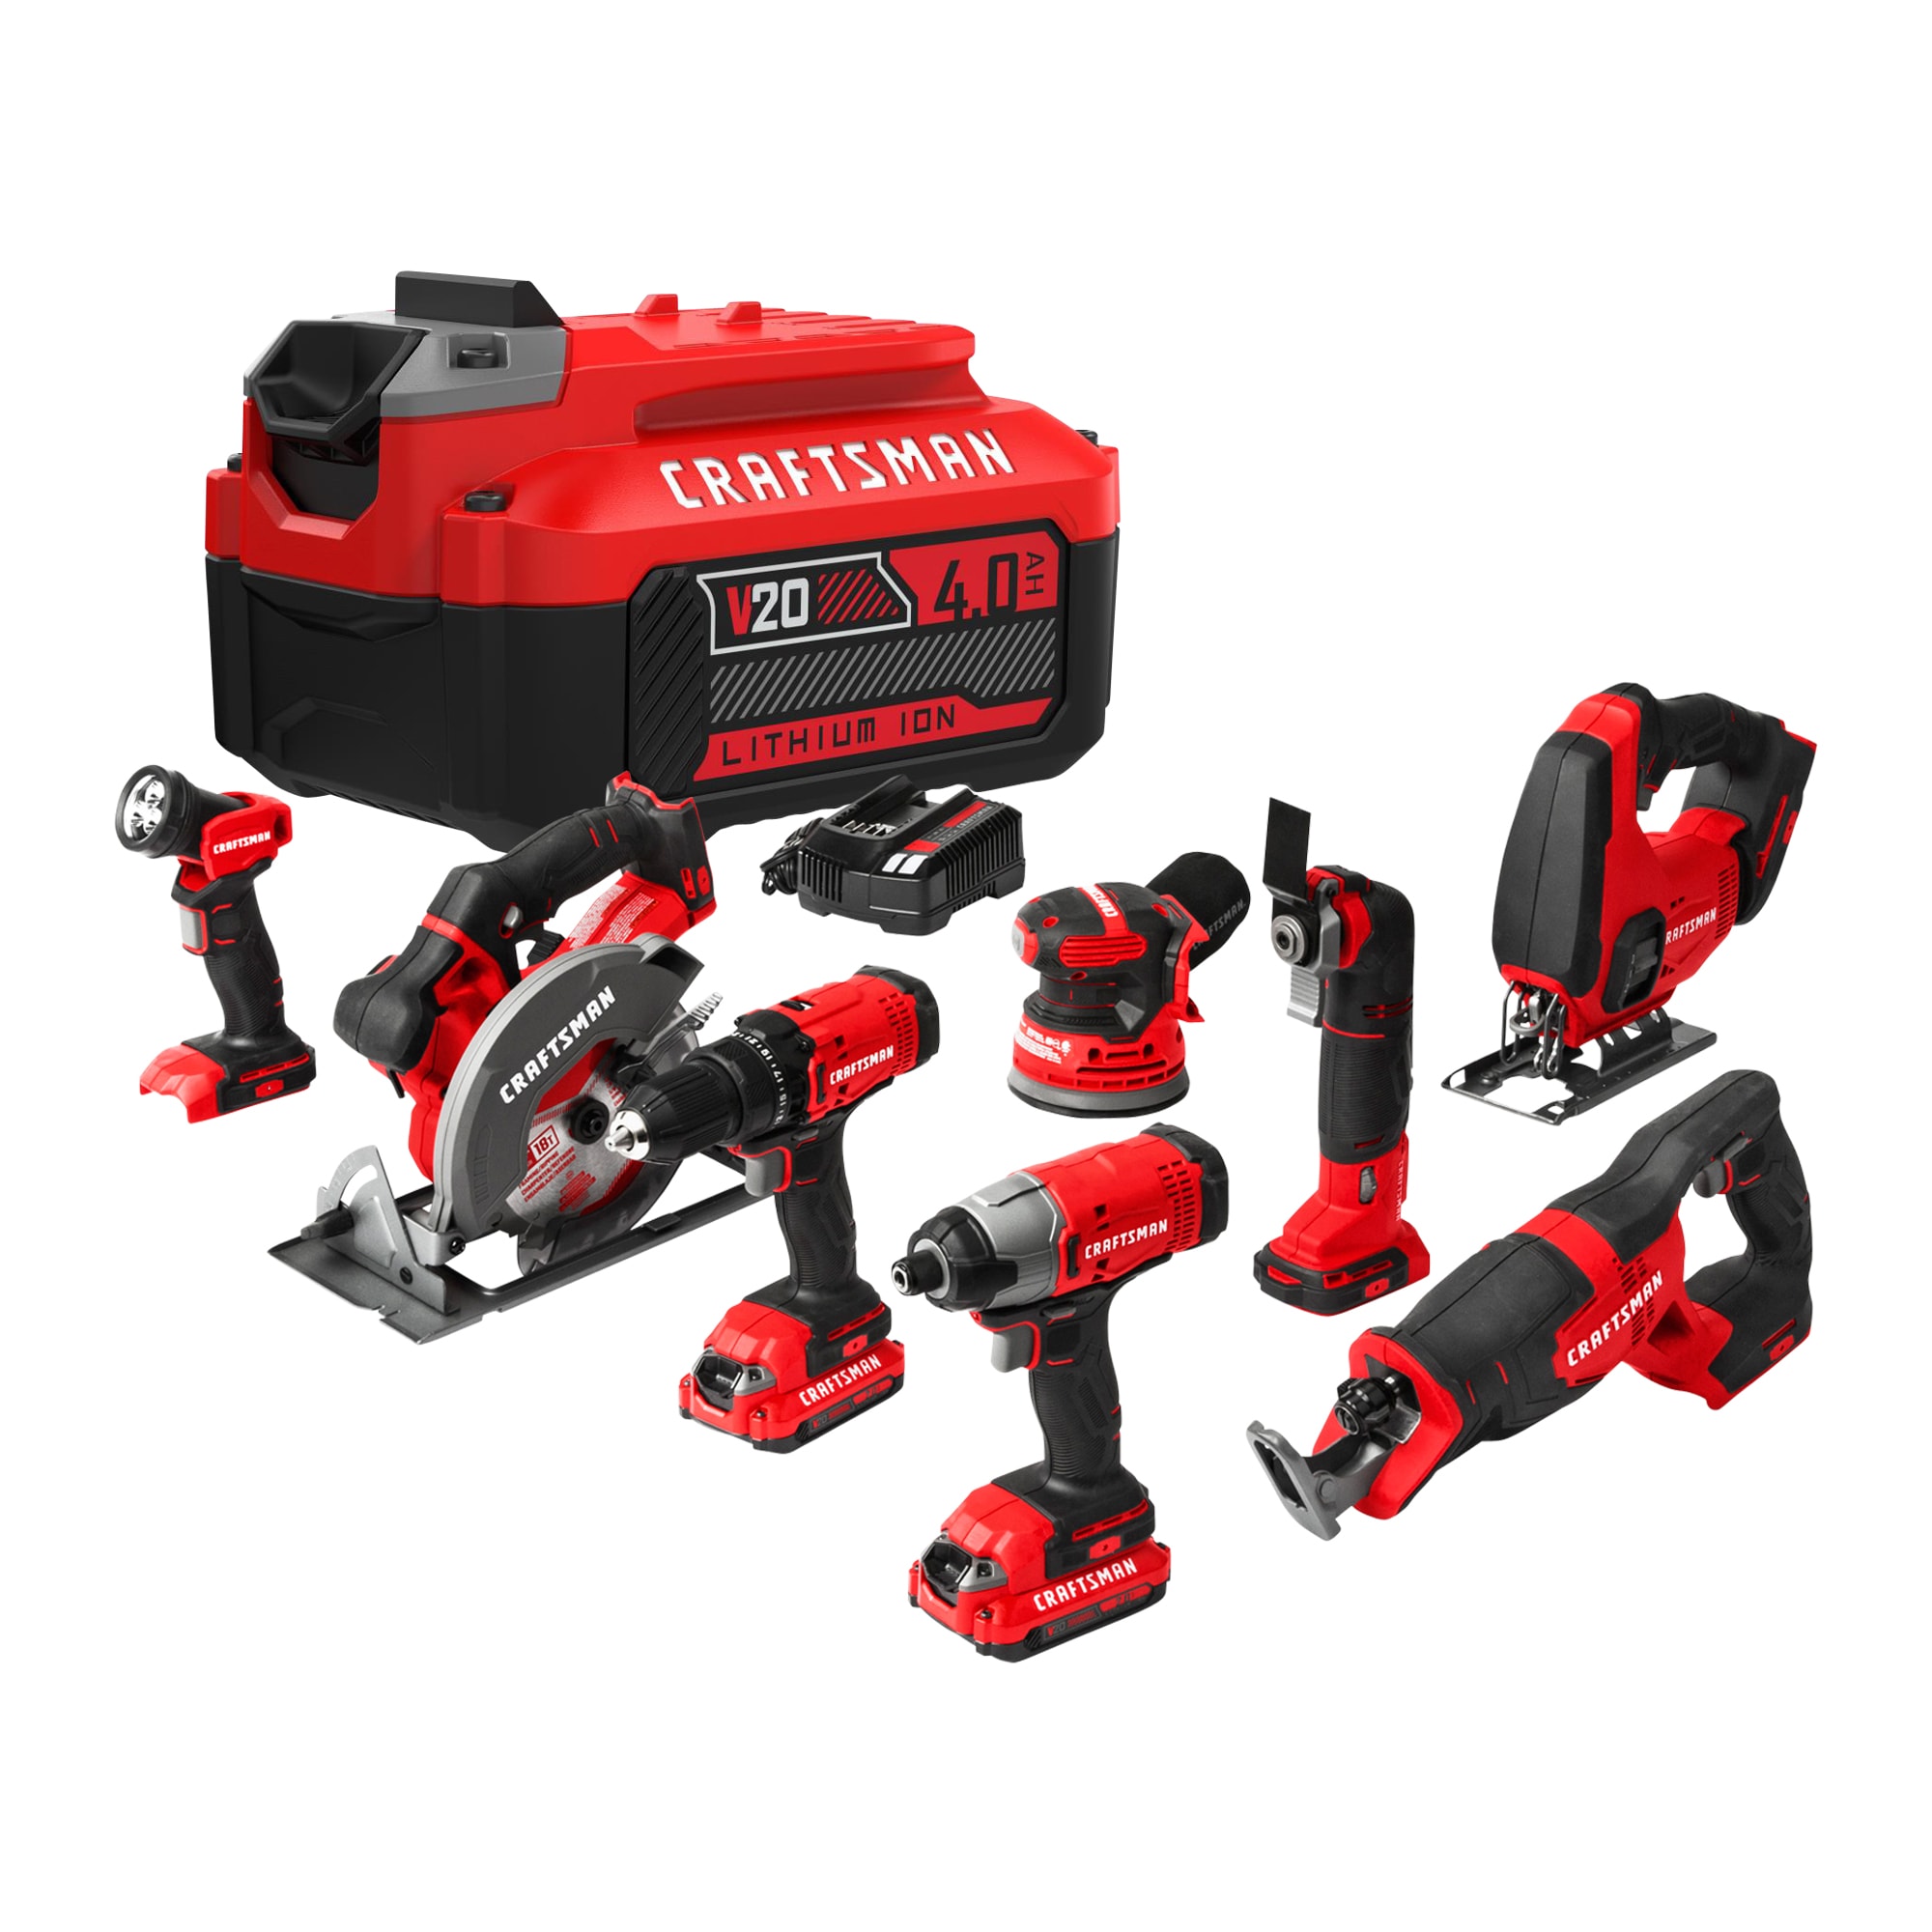 CRAFTSMAN V20 8-Tool 20-Volt Max Power Tool Combo Kit with Soft Case & V20 20-Volt Max 4 Amp-Hour Lithium Power Tool Battery